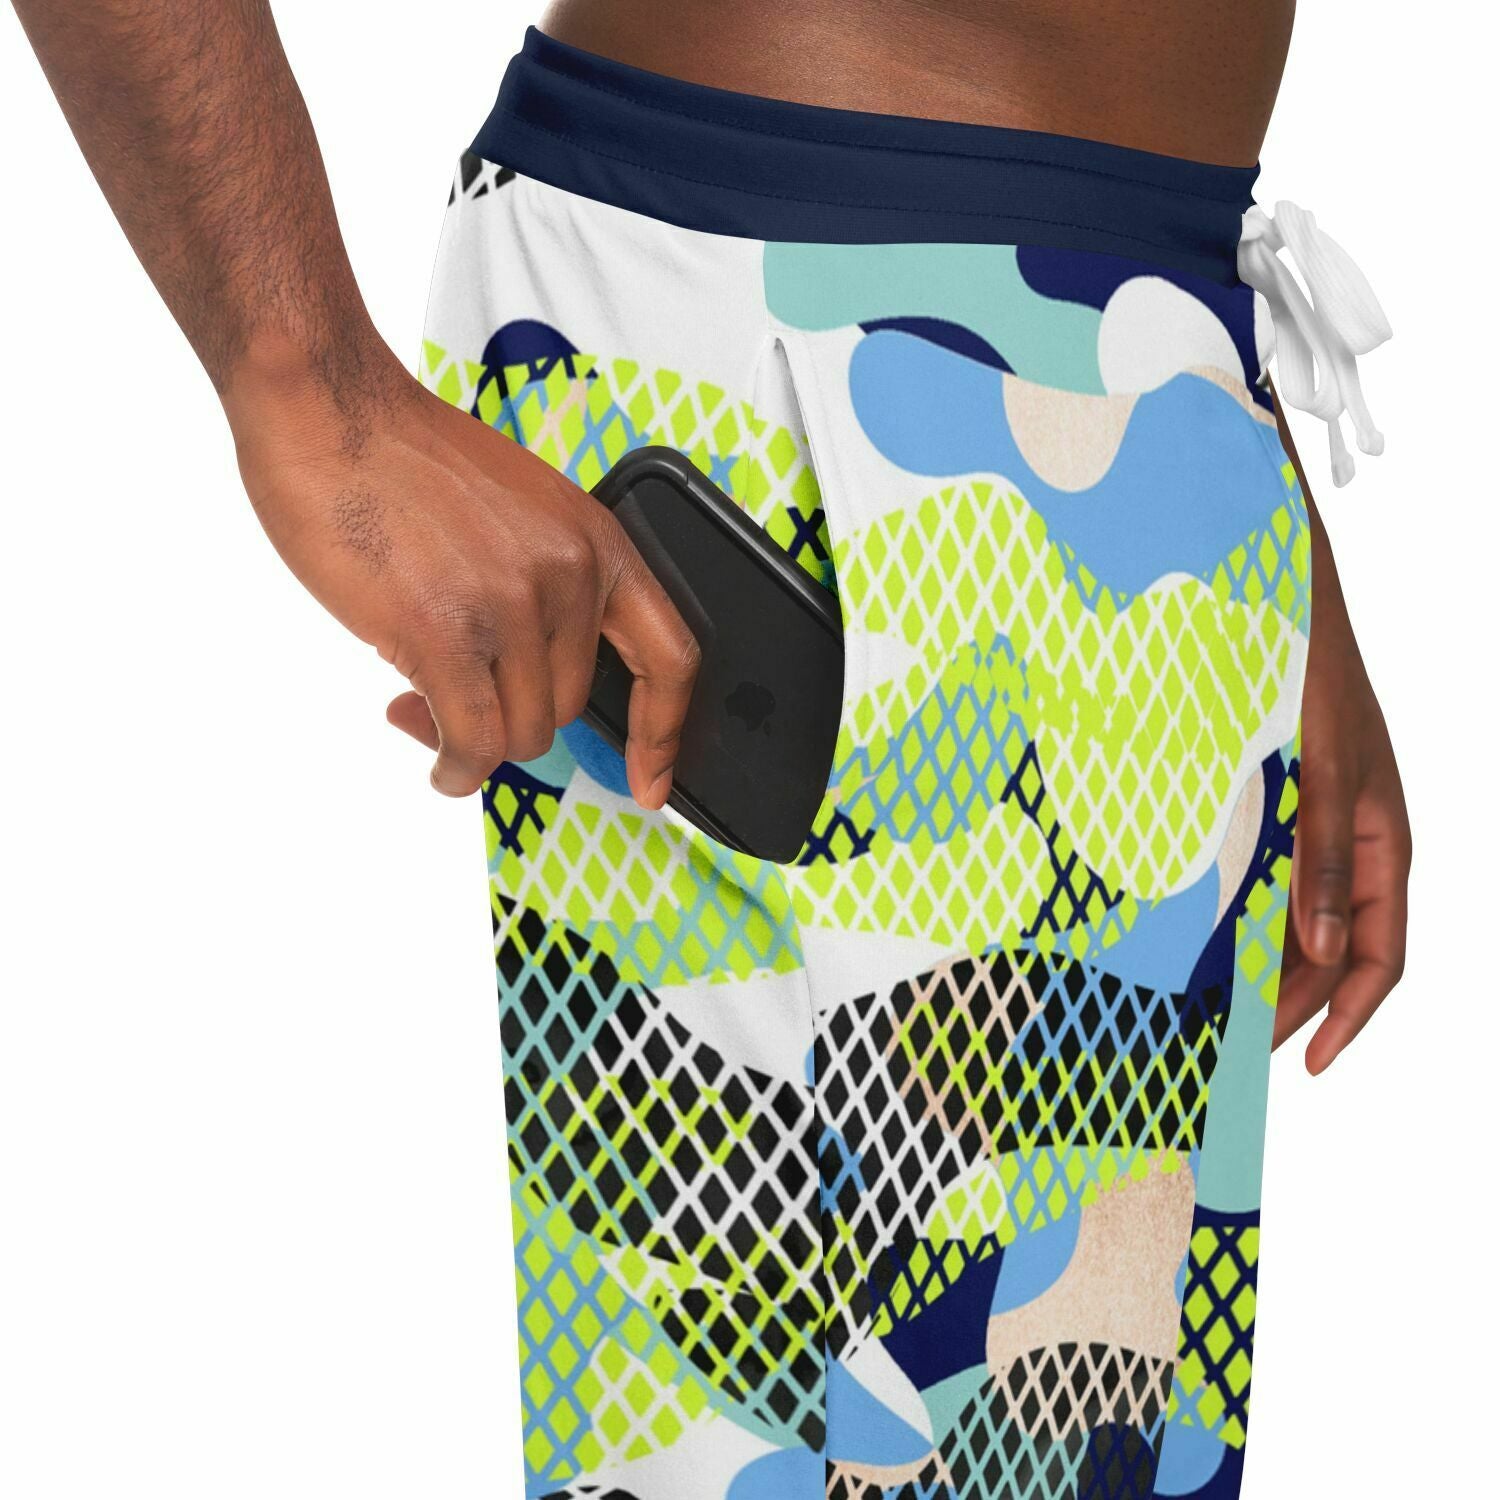 Blue and Lime Eco-Poly Camo Unisex Joggers